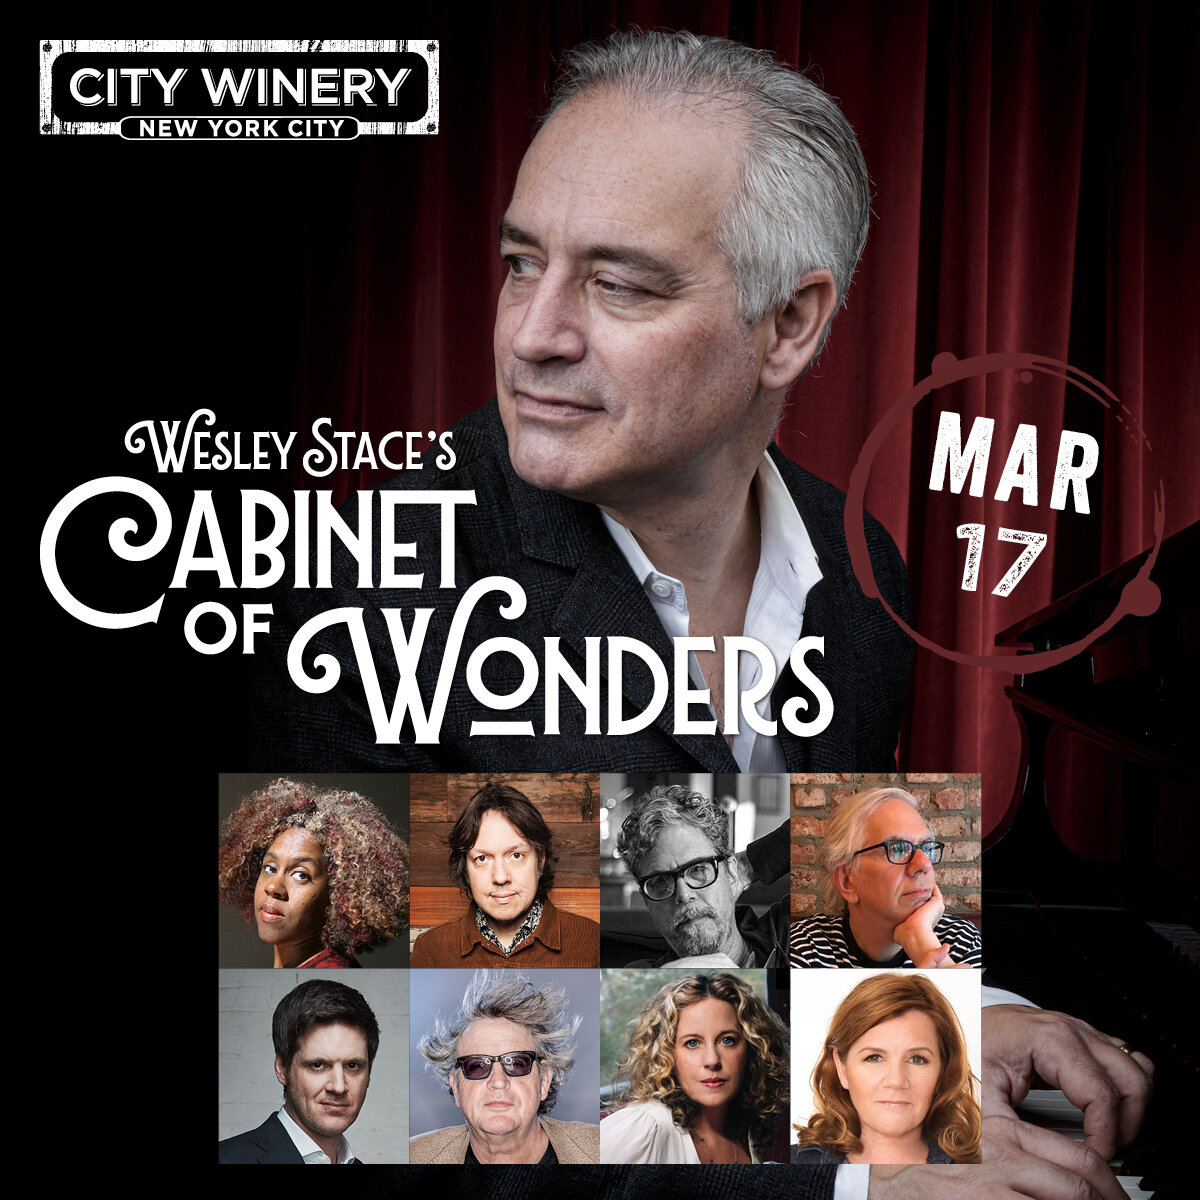 THIS SUNDAY (3/17): a special St. Paddy's day Cabinet Of Wonders at @citywinerynyc with @wesleystace, Gary Louris, Amy Helm, Michael James Esper, Dave Hill, Ira Robbins, Paul Muldoon, Errollyn Wallen &amp; Mare Winningham.

According to Wes: 
&quot;I